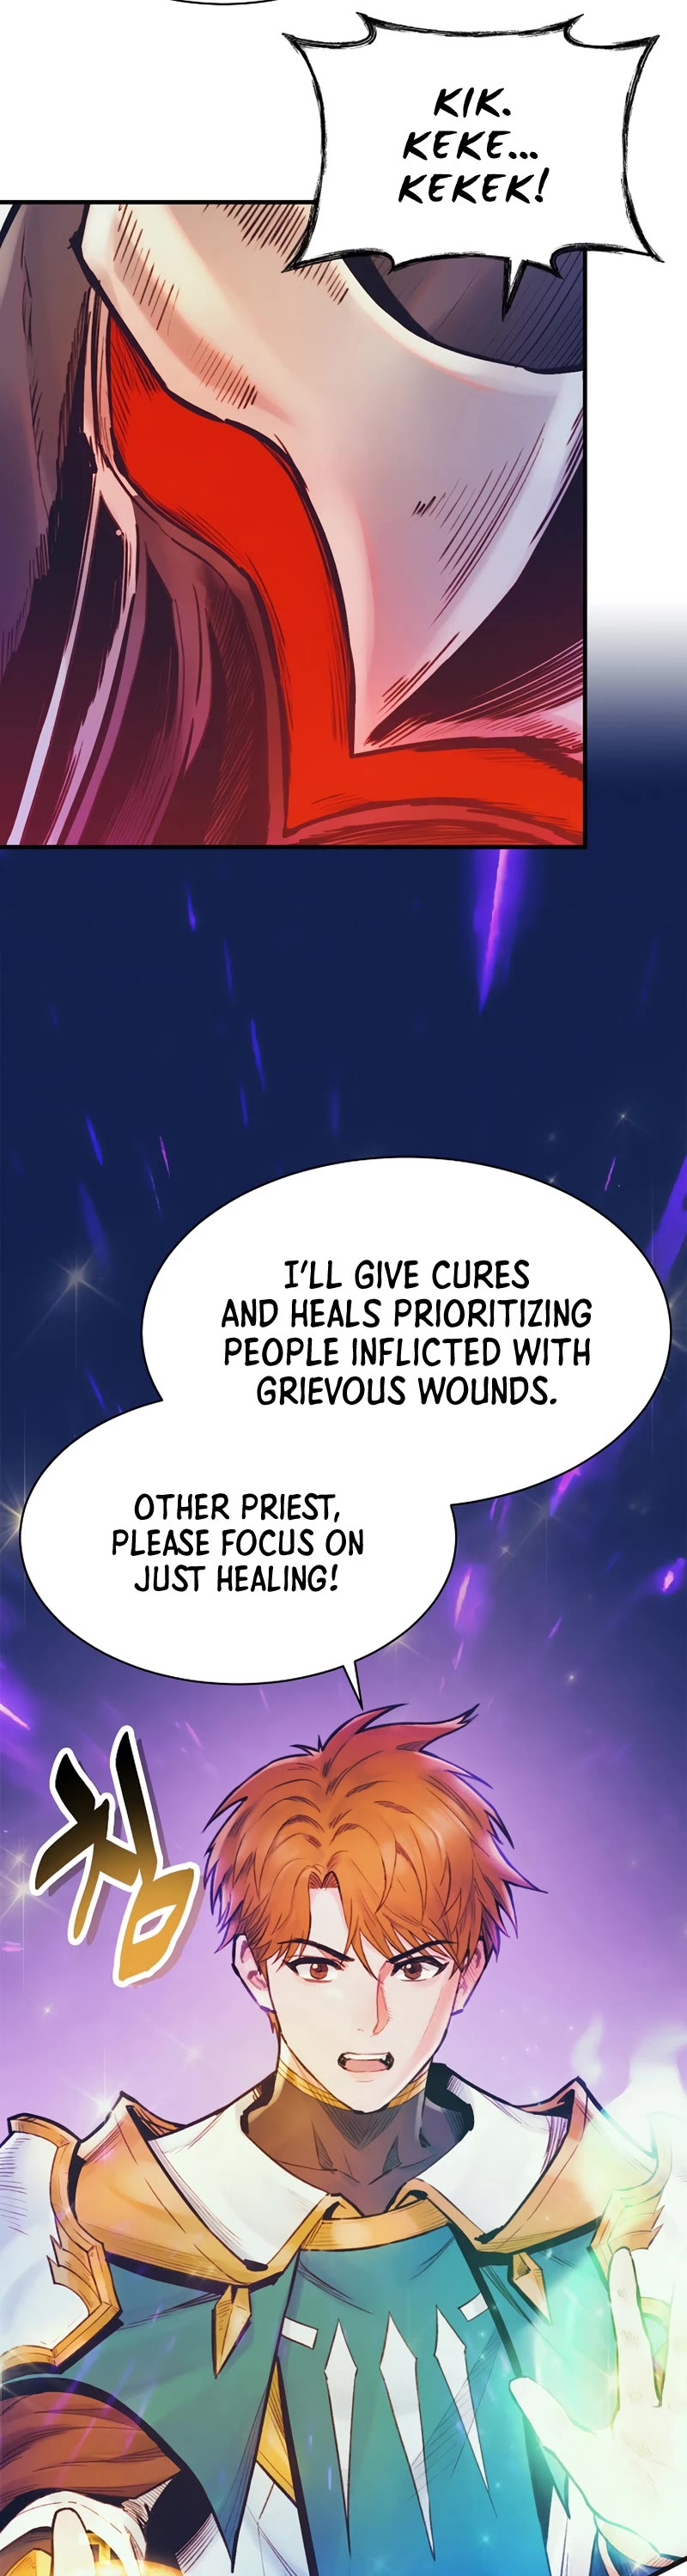 The Healing Priest Of The Sun - Page 3